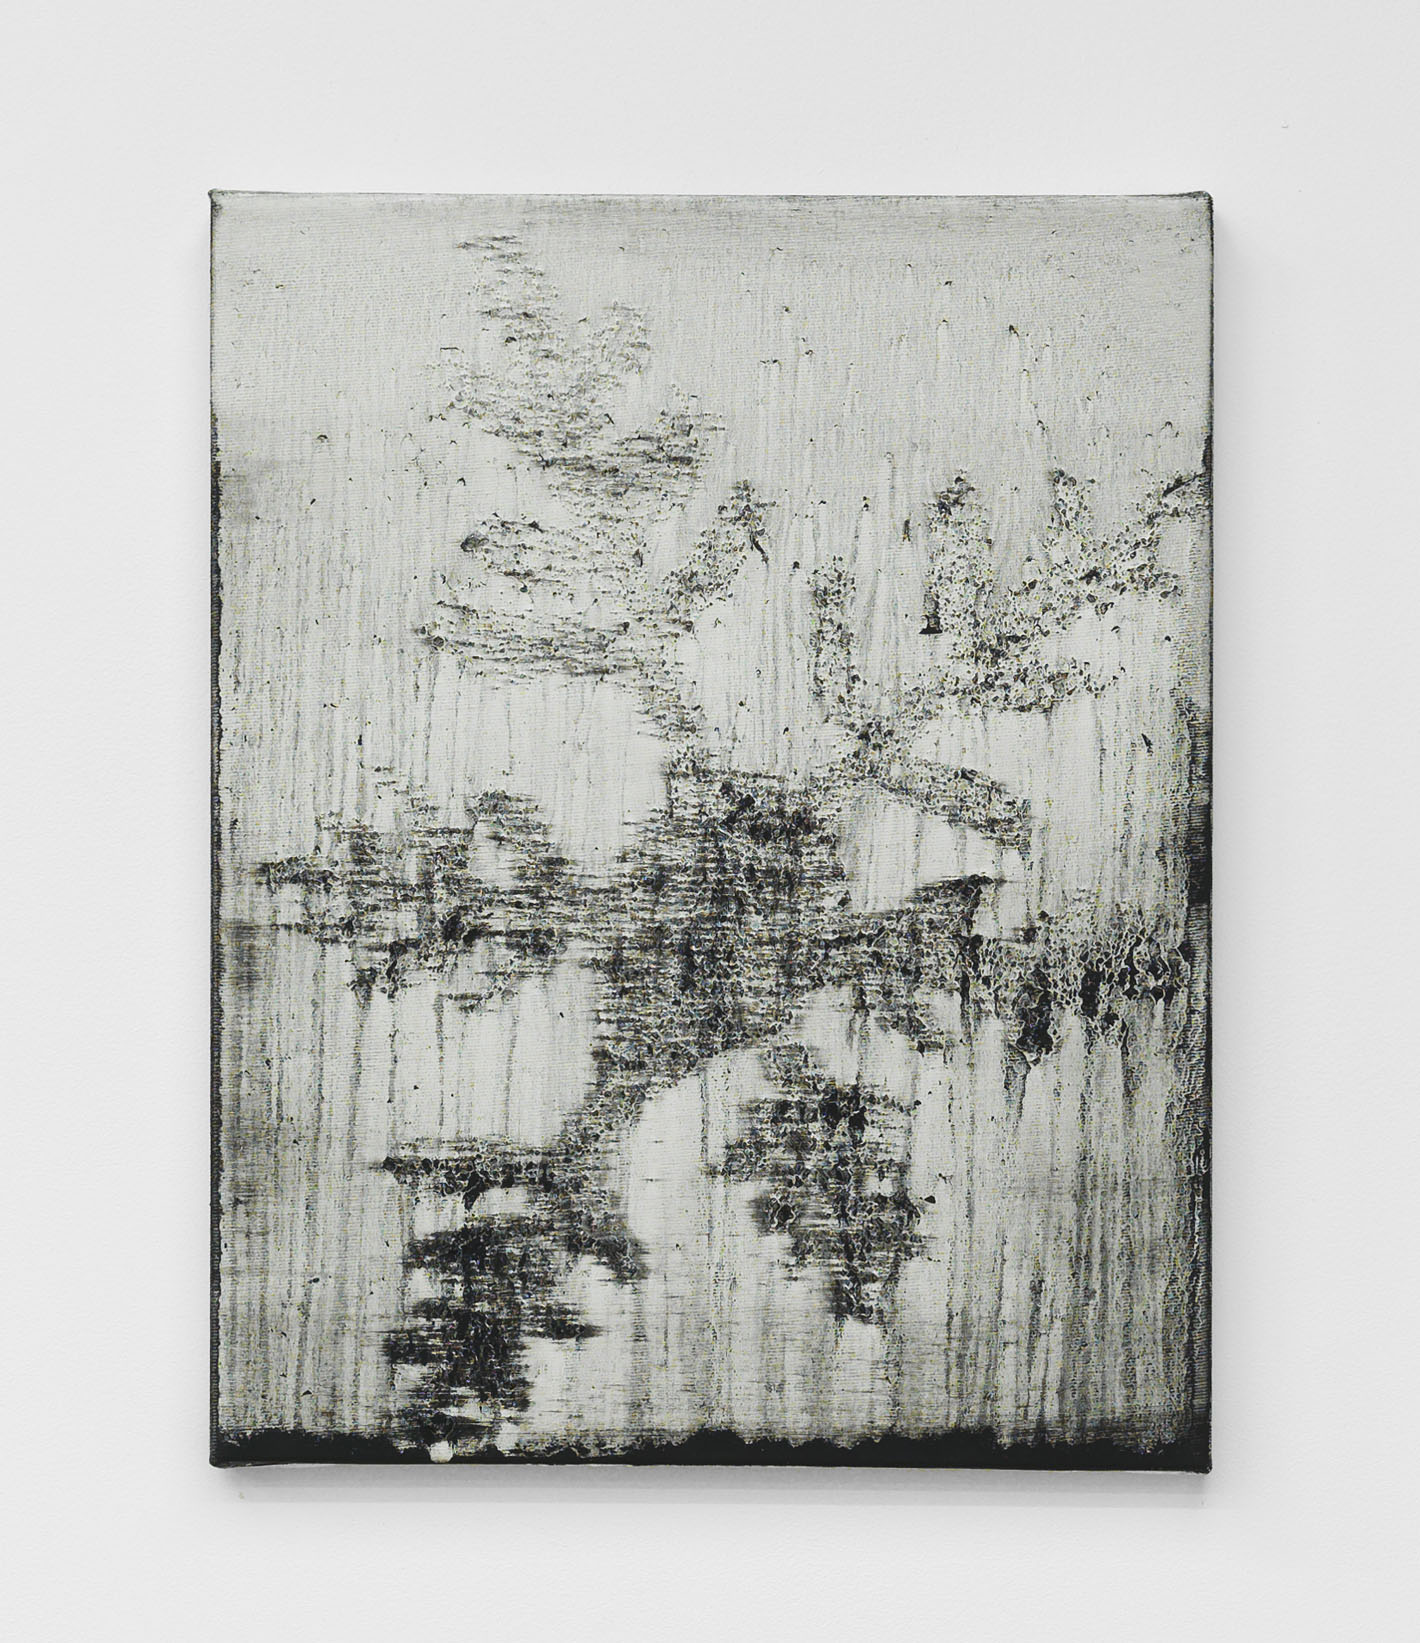 Alex Kwartler, Snowflake (To the Harbormaster, for ML), 2018, oil and pumice on canvas, 14h x 11w in.